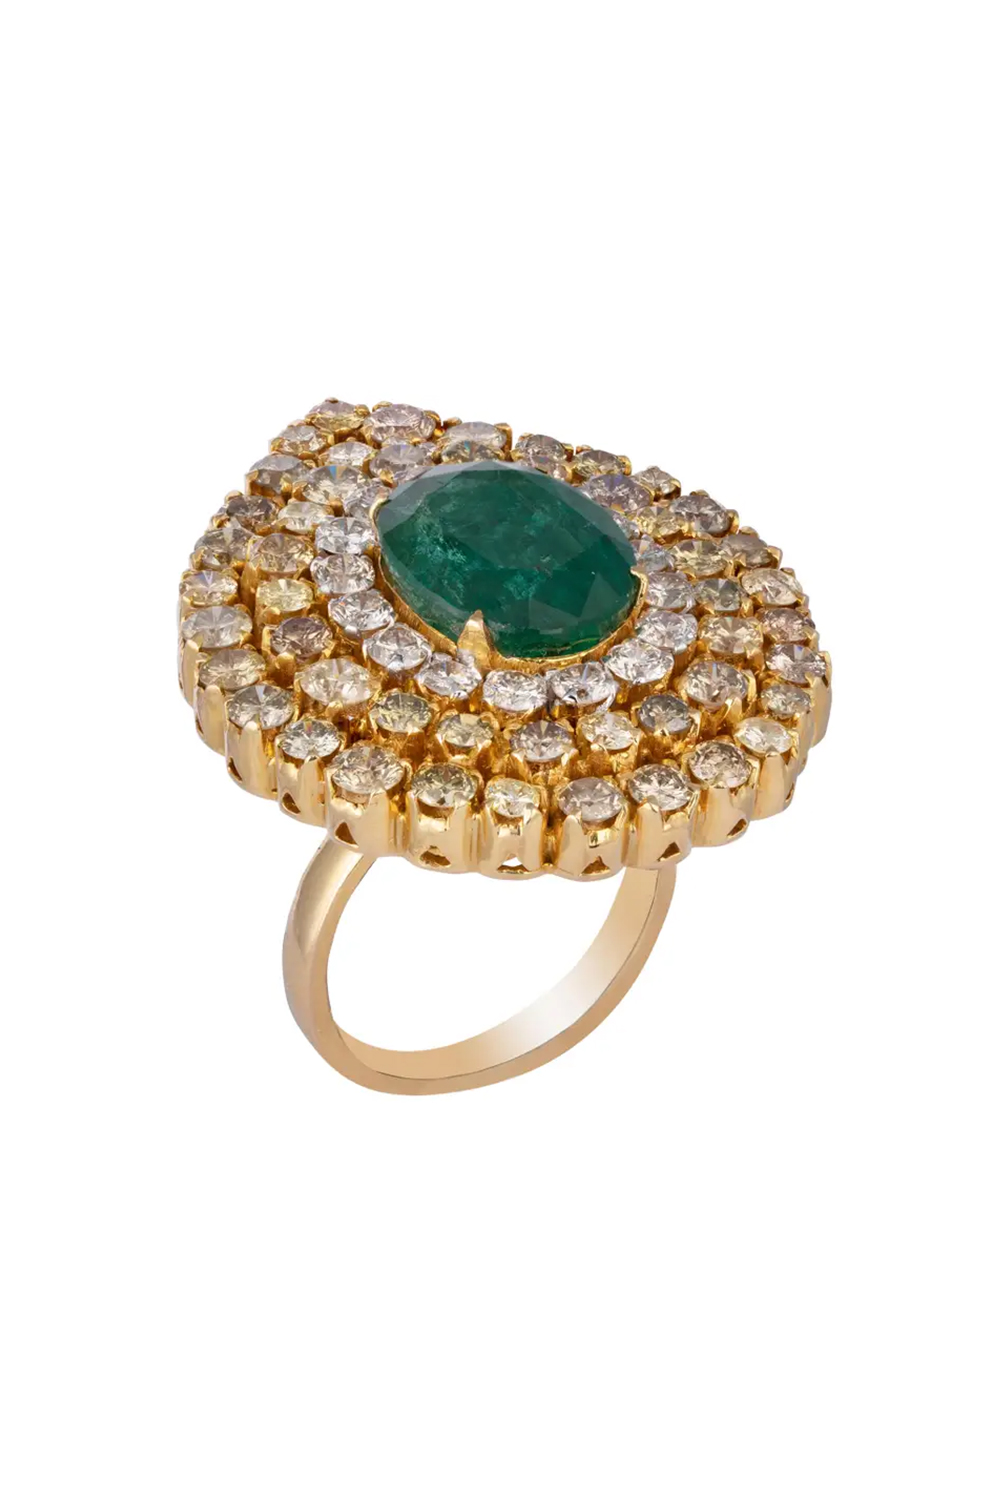 5.64cts Diamond & 7.47cts Emerald gold ring